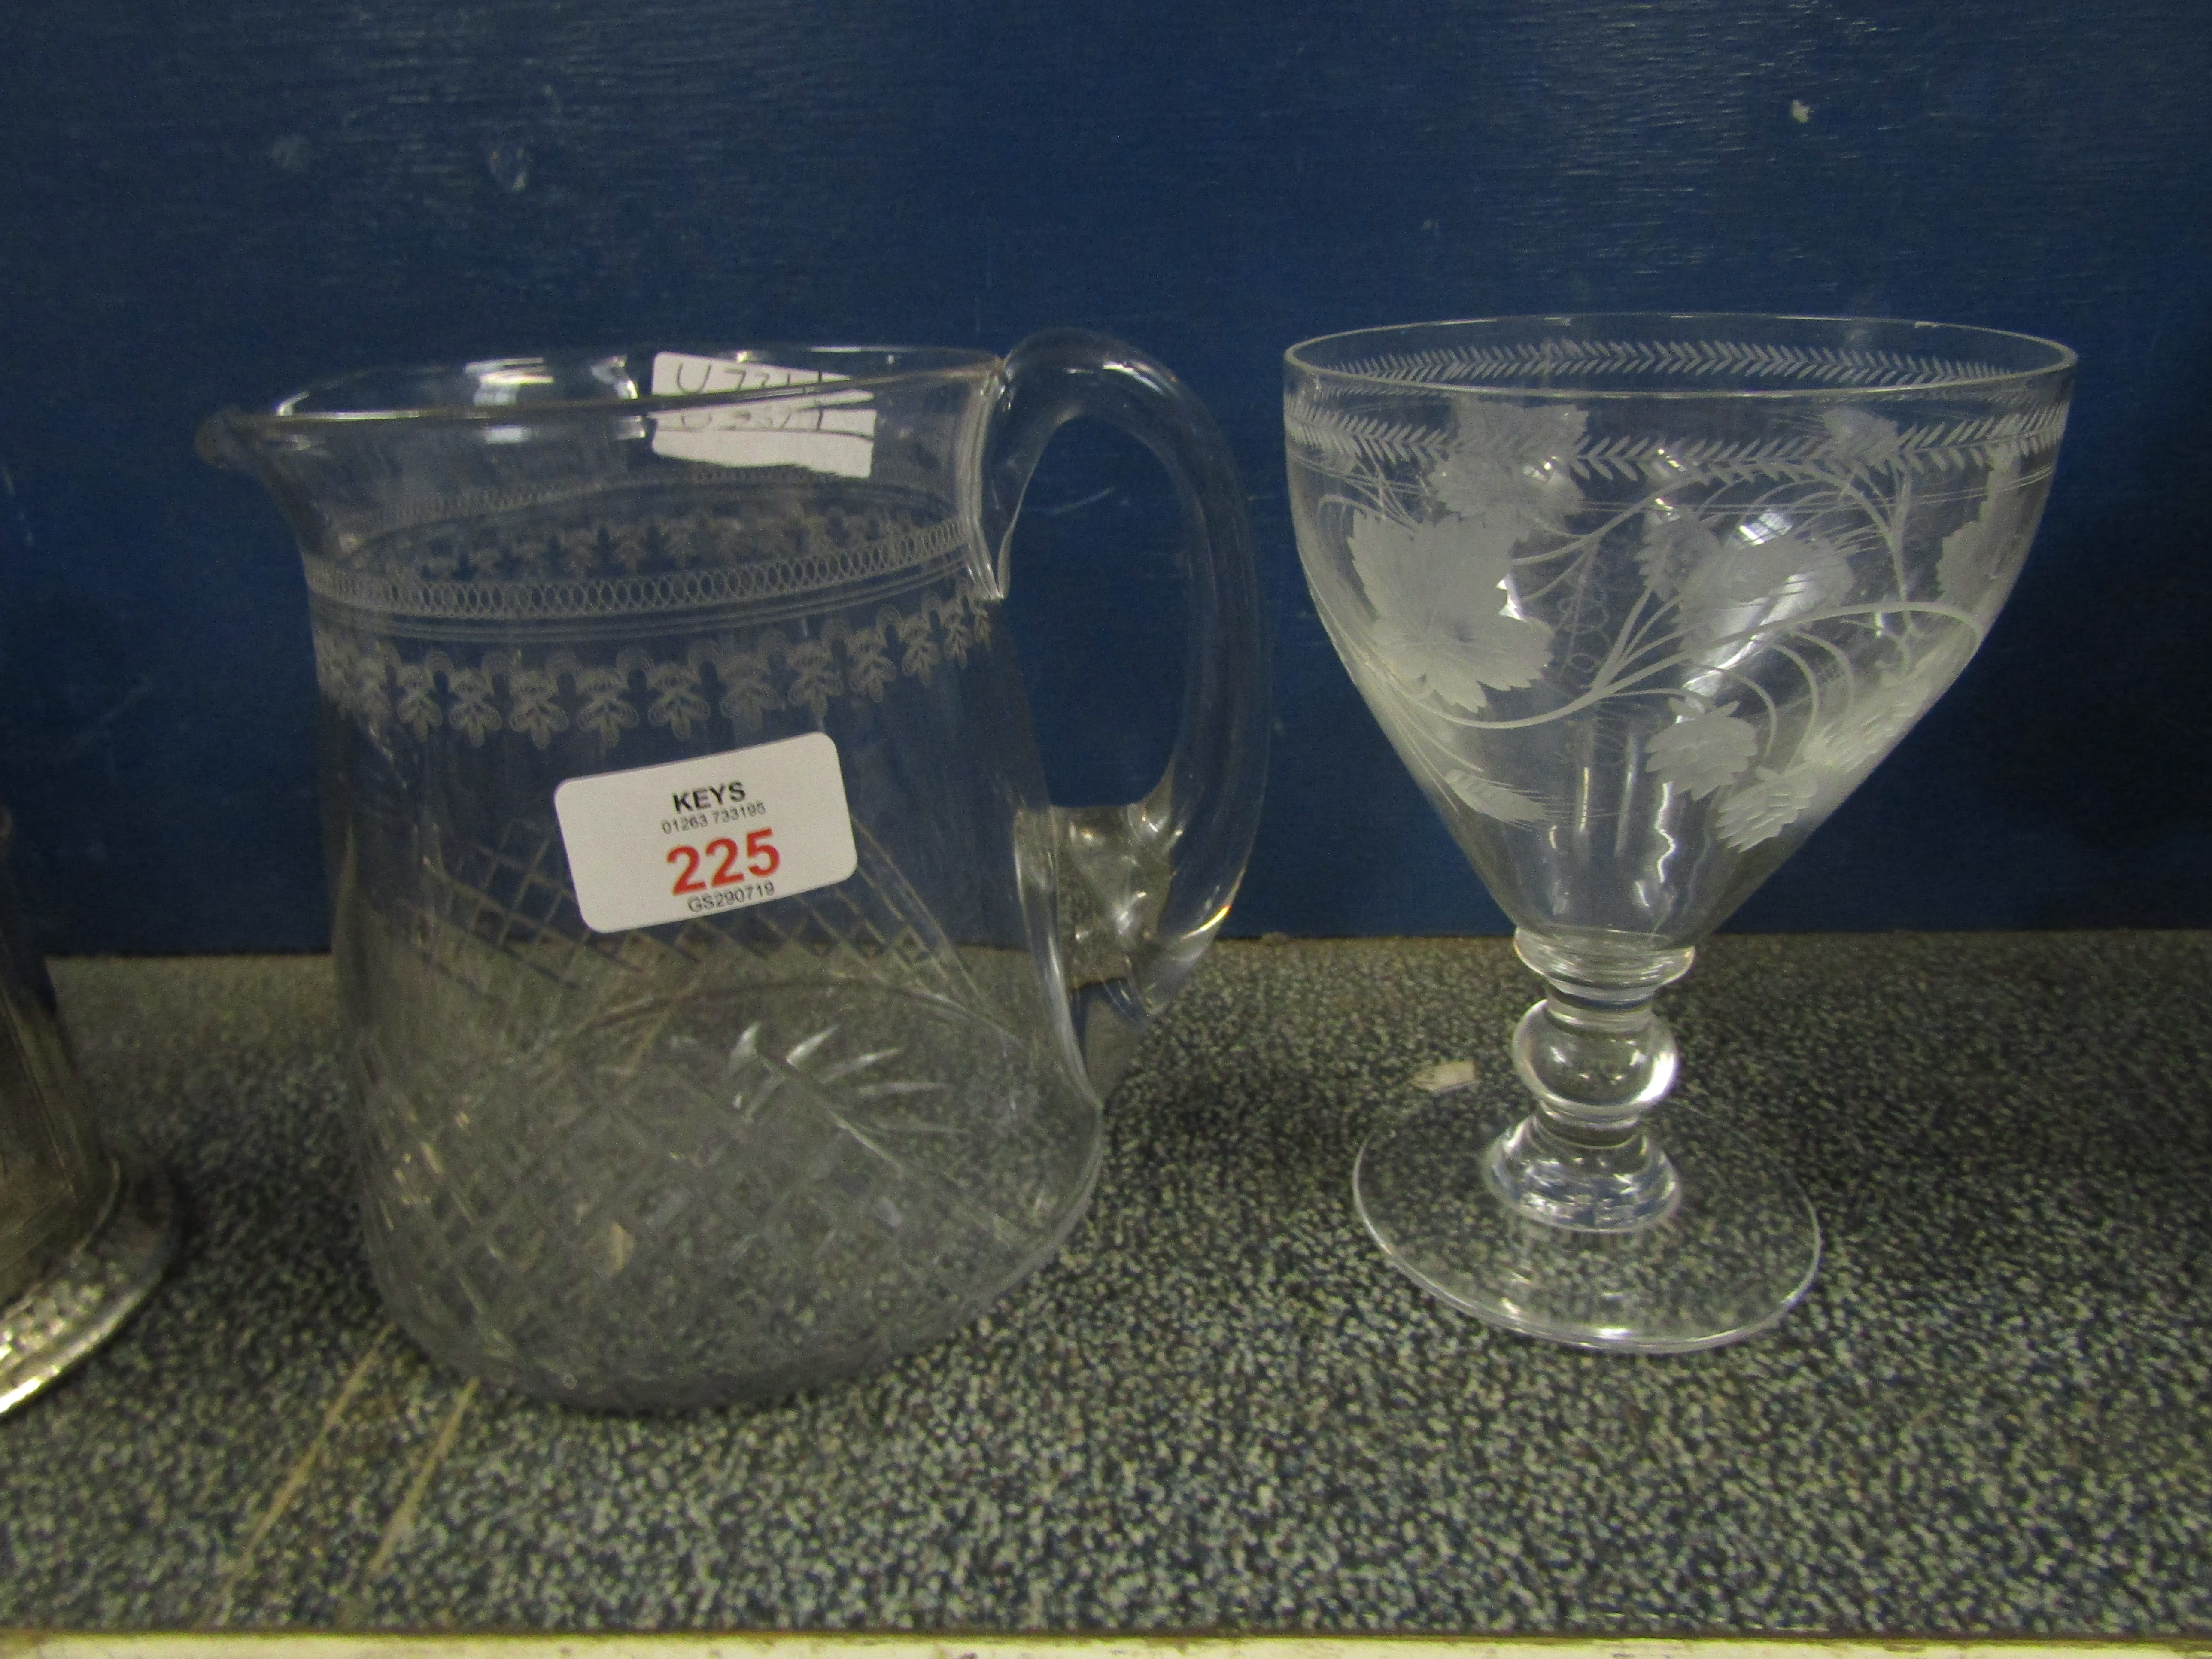 EARLY 20TH CENTURY ETCHED JUG TOGETHER WITH 19TH CENTURY ETCHED GOBLET (2)